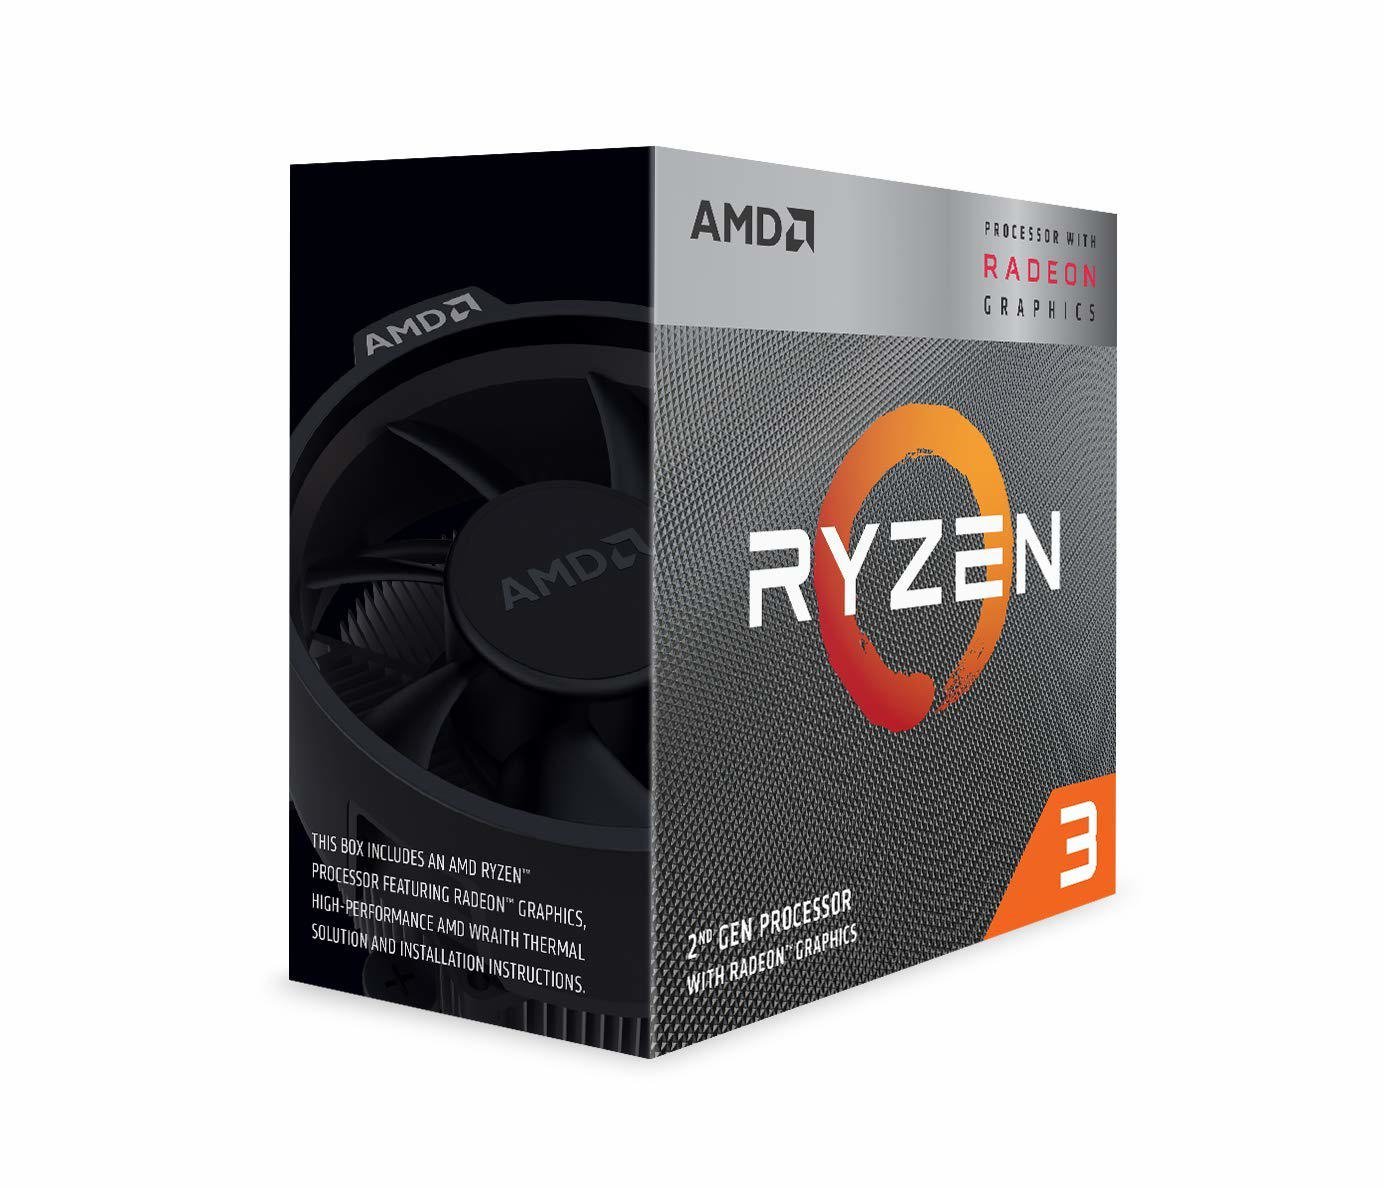 Amd Ryzen 3 4100, 4-Core/8 Threads Unlocked, Max Freq 4.00GHz, 6MB Cache Socket Am4 65W, With Wraith Stealth Cooler (Amdcpu)